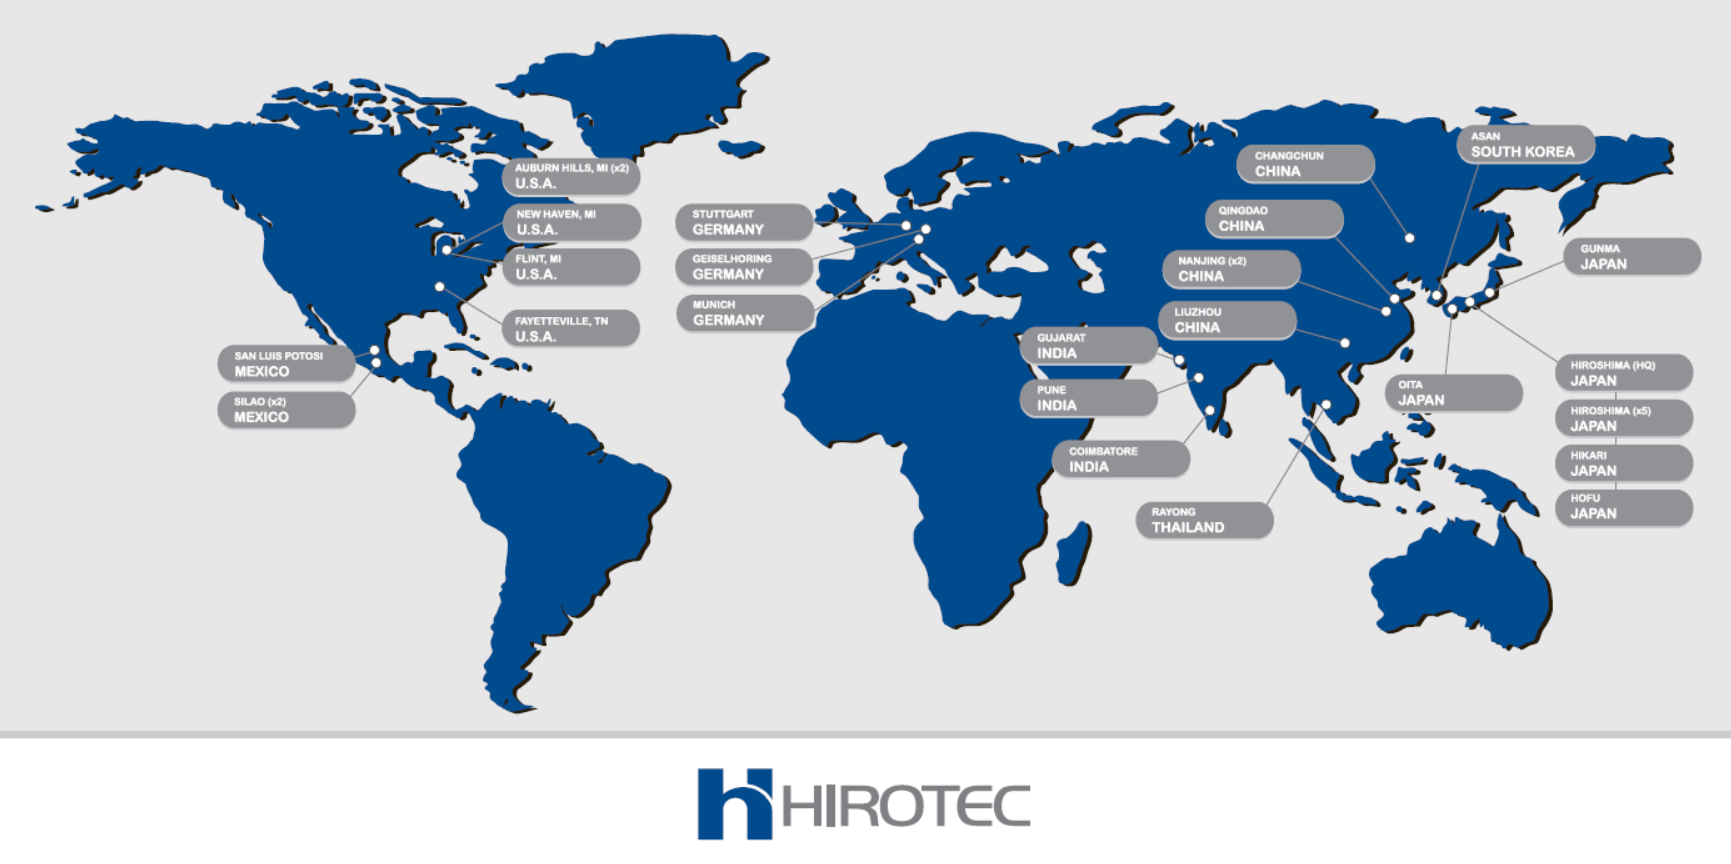 HIROTEC Group Locations